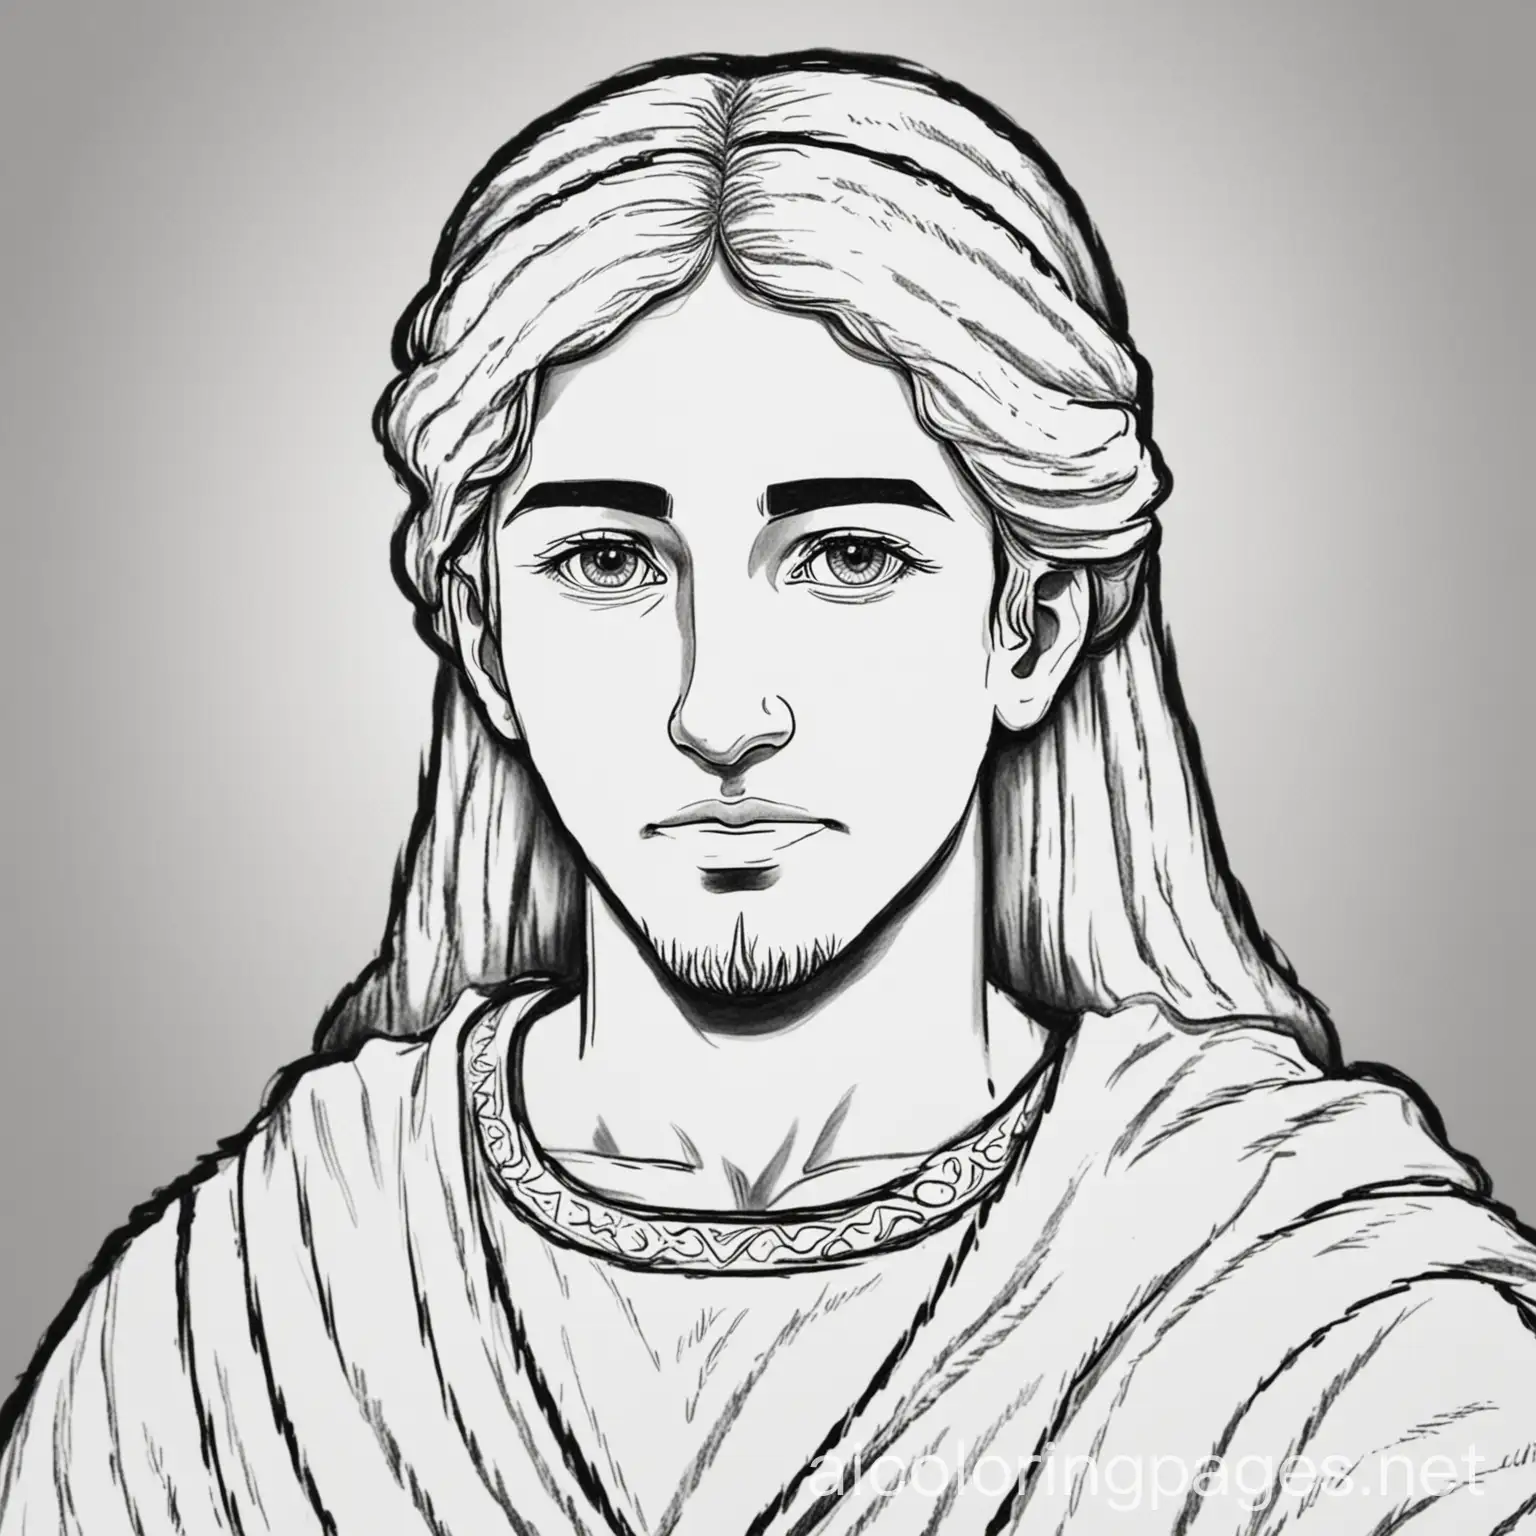 Jacob-Bible-Coloring-Page-Black-and-White-Line-Art-for-Children